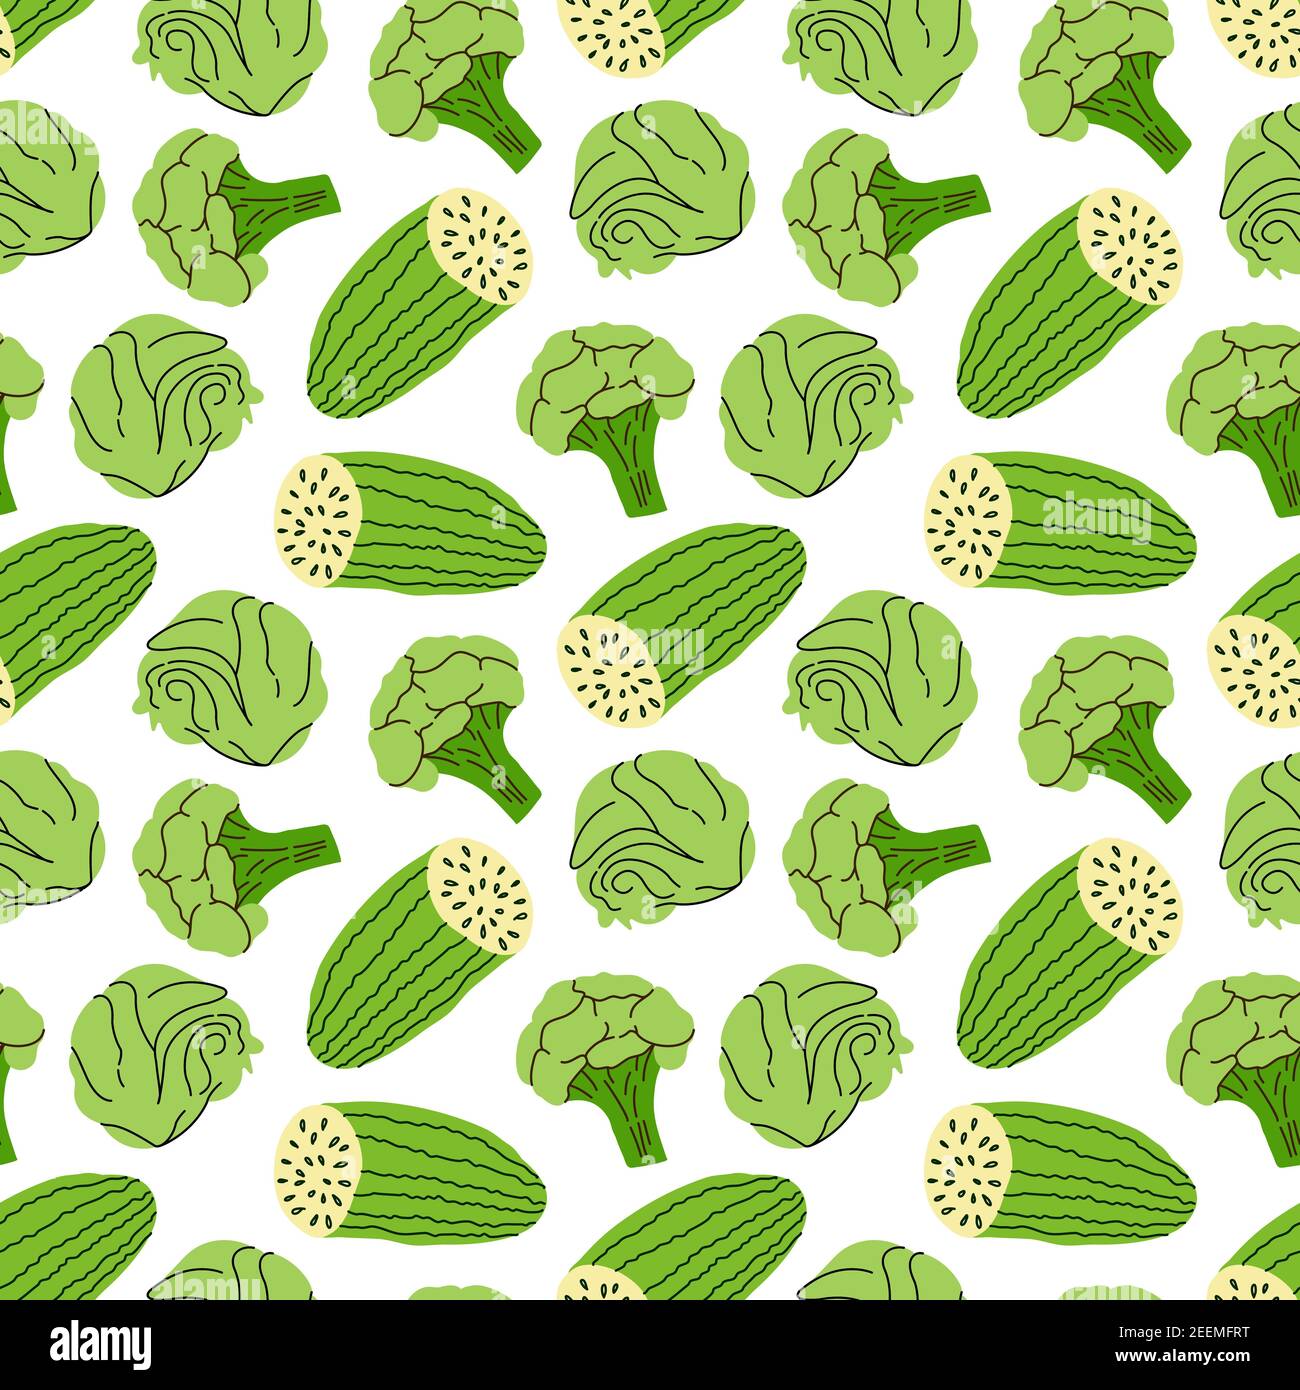 vegetable pattern with cucumber, broccoli, cabbage element vector illustration Stock Vector